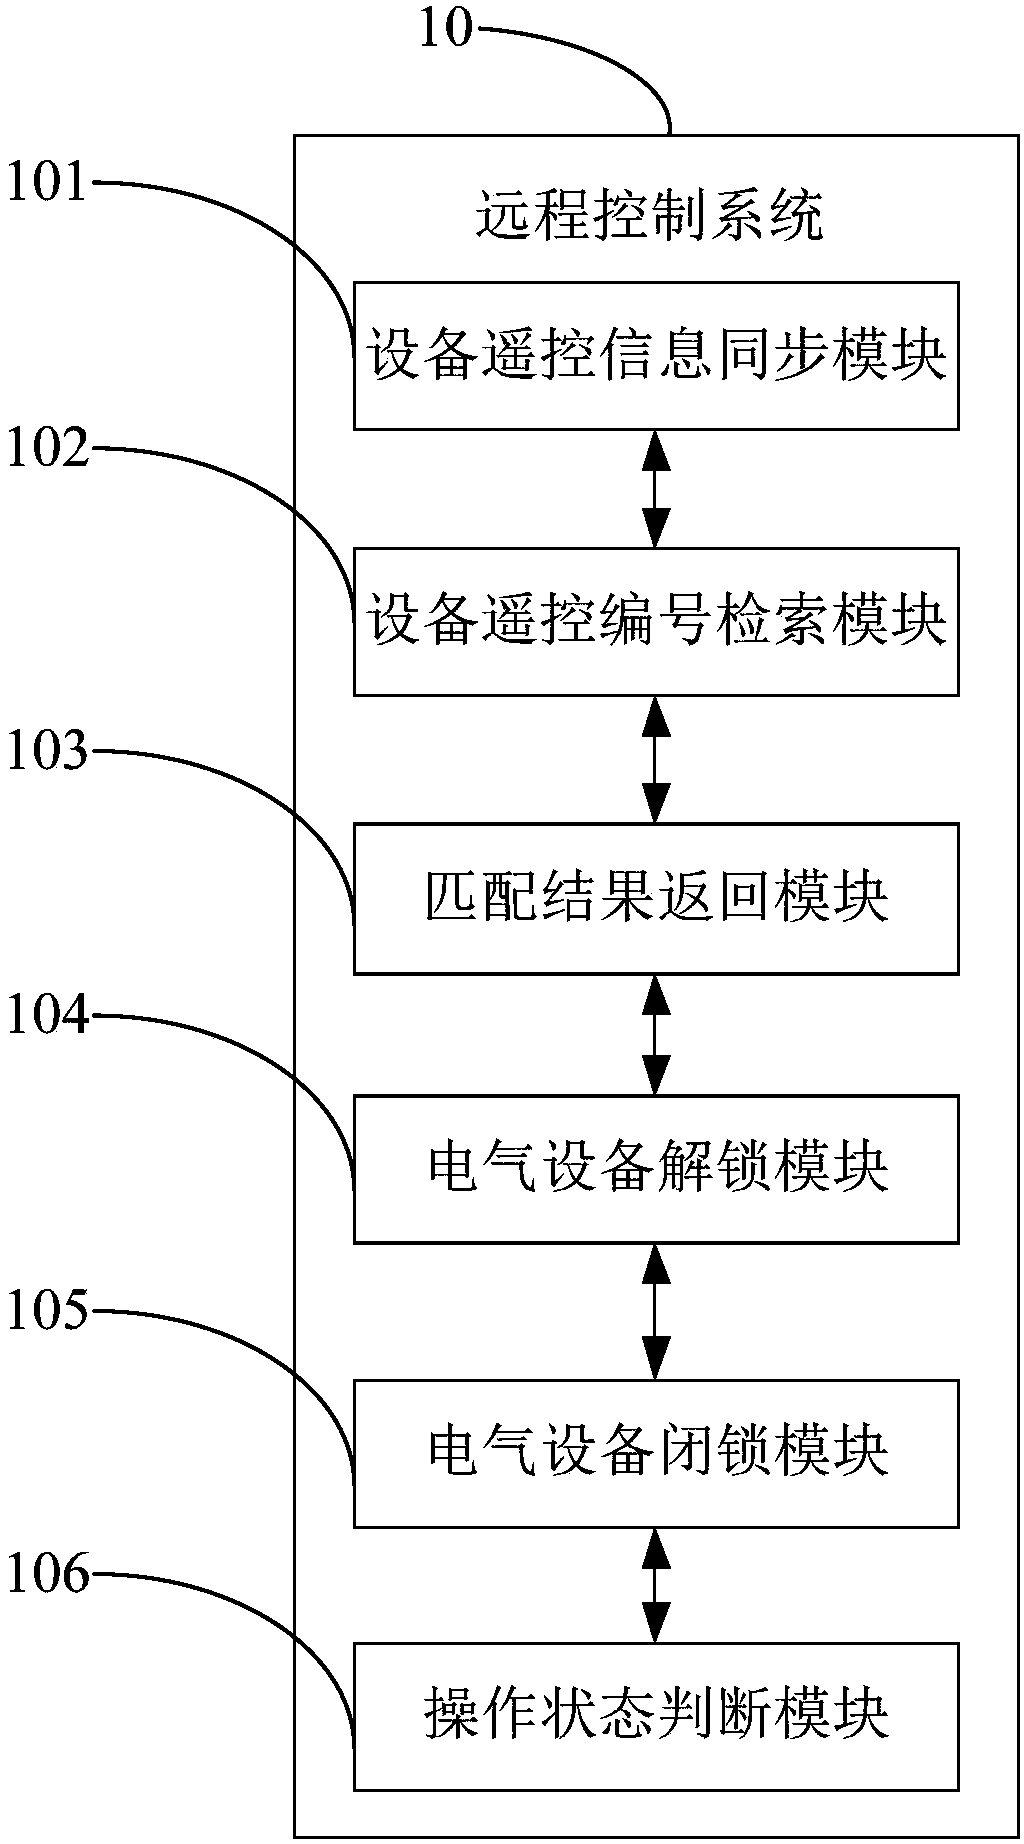 A remote control system and method